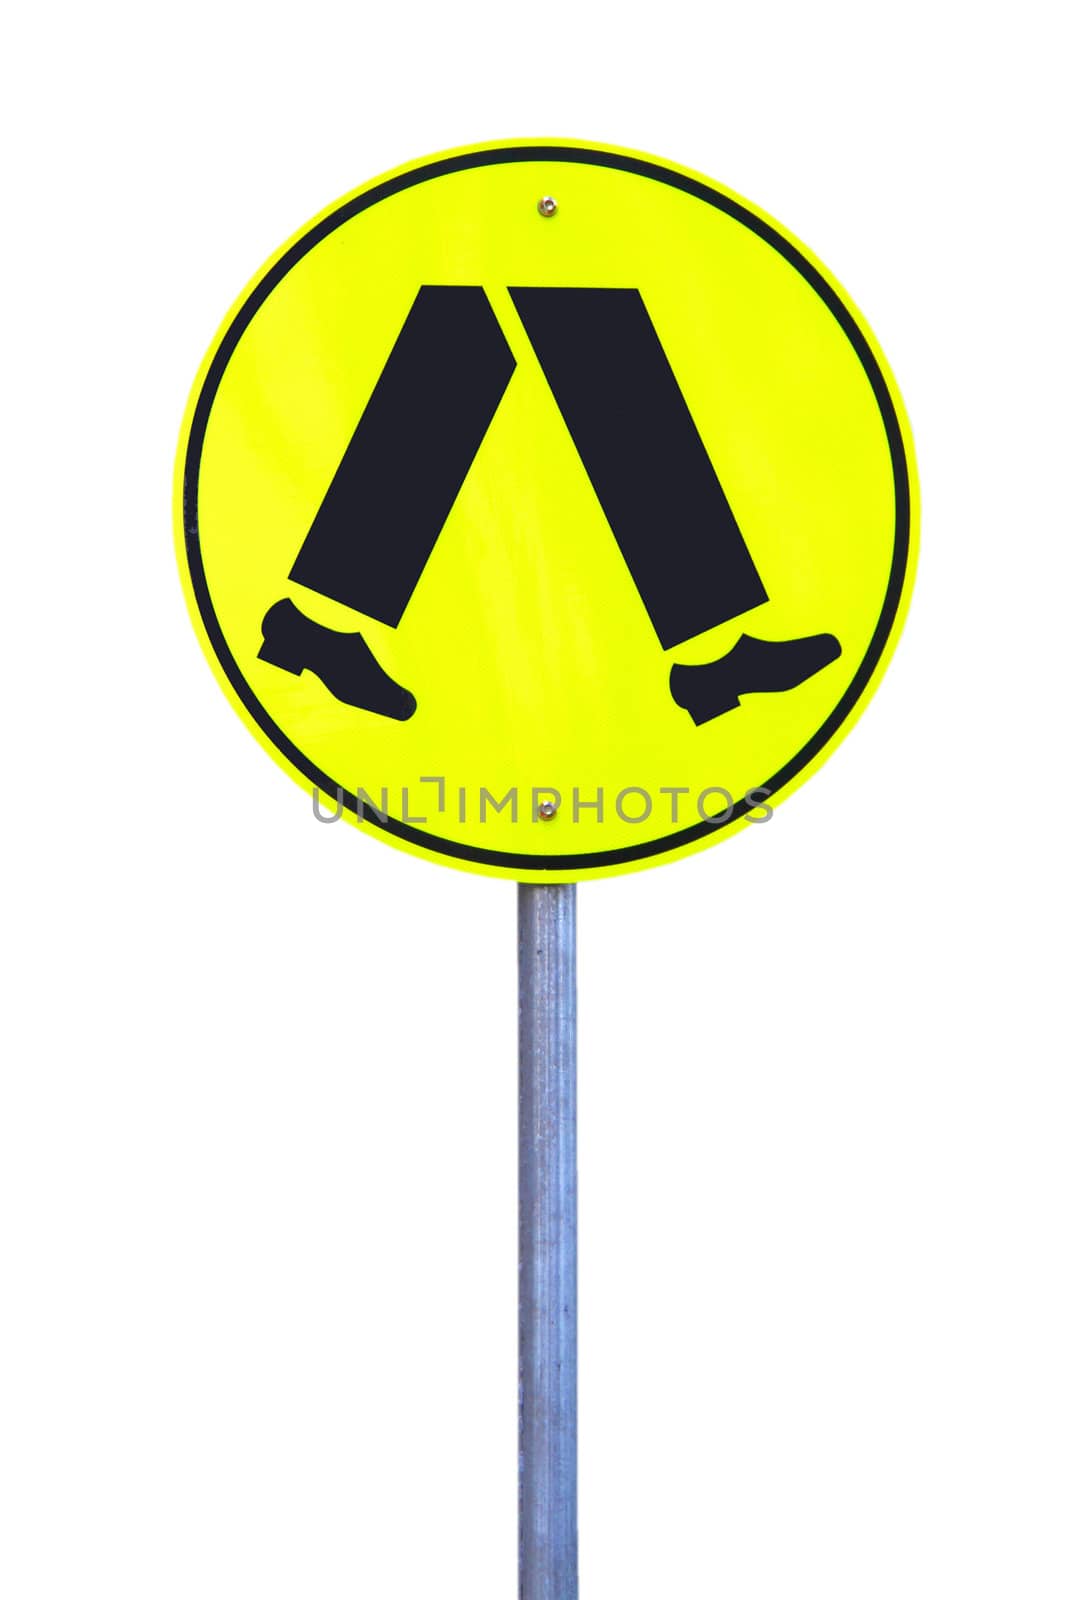 Yellow Reflective Pedestrian Crossing Sign - Current Australian Road Sign. Isolated on White